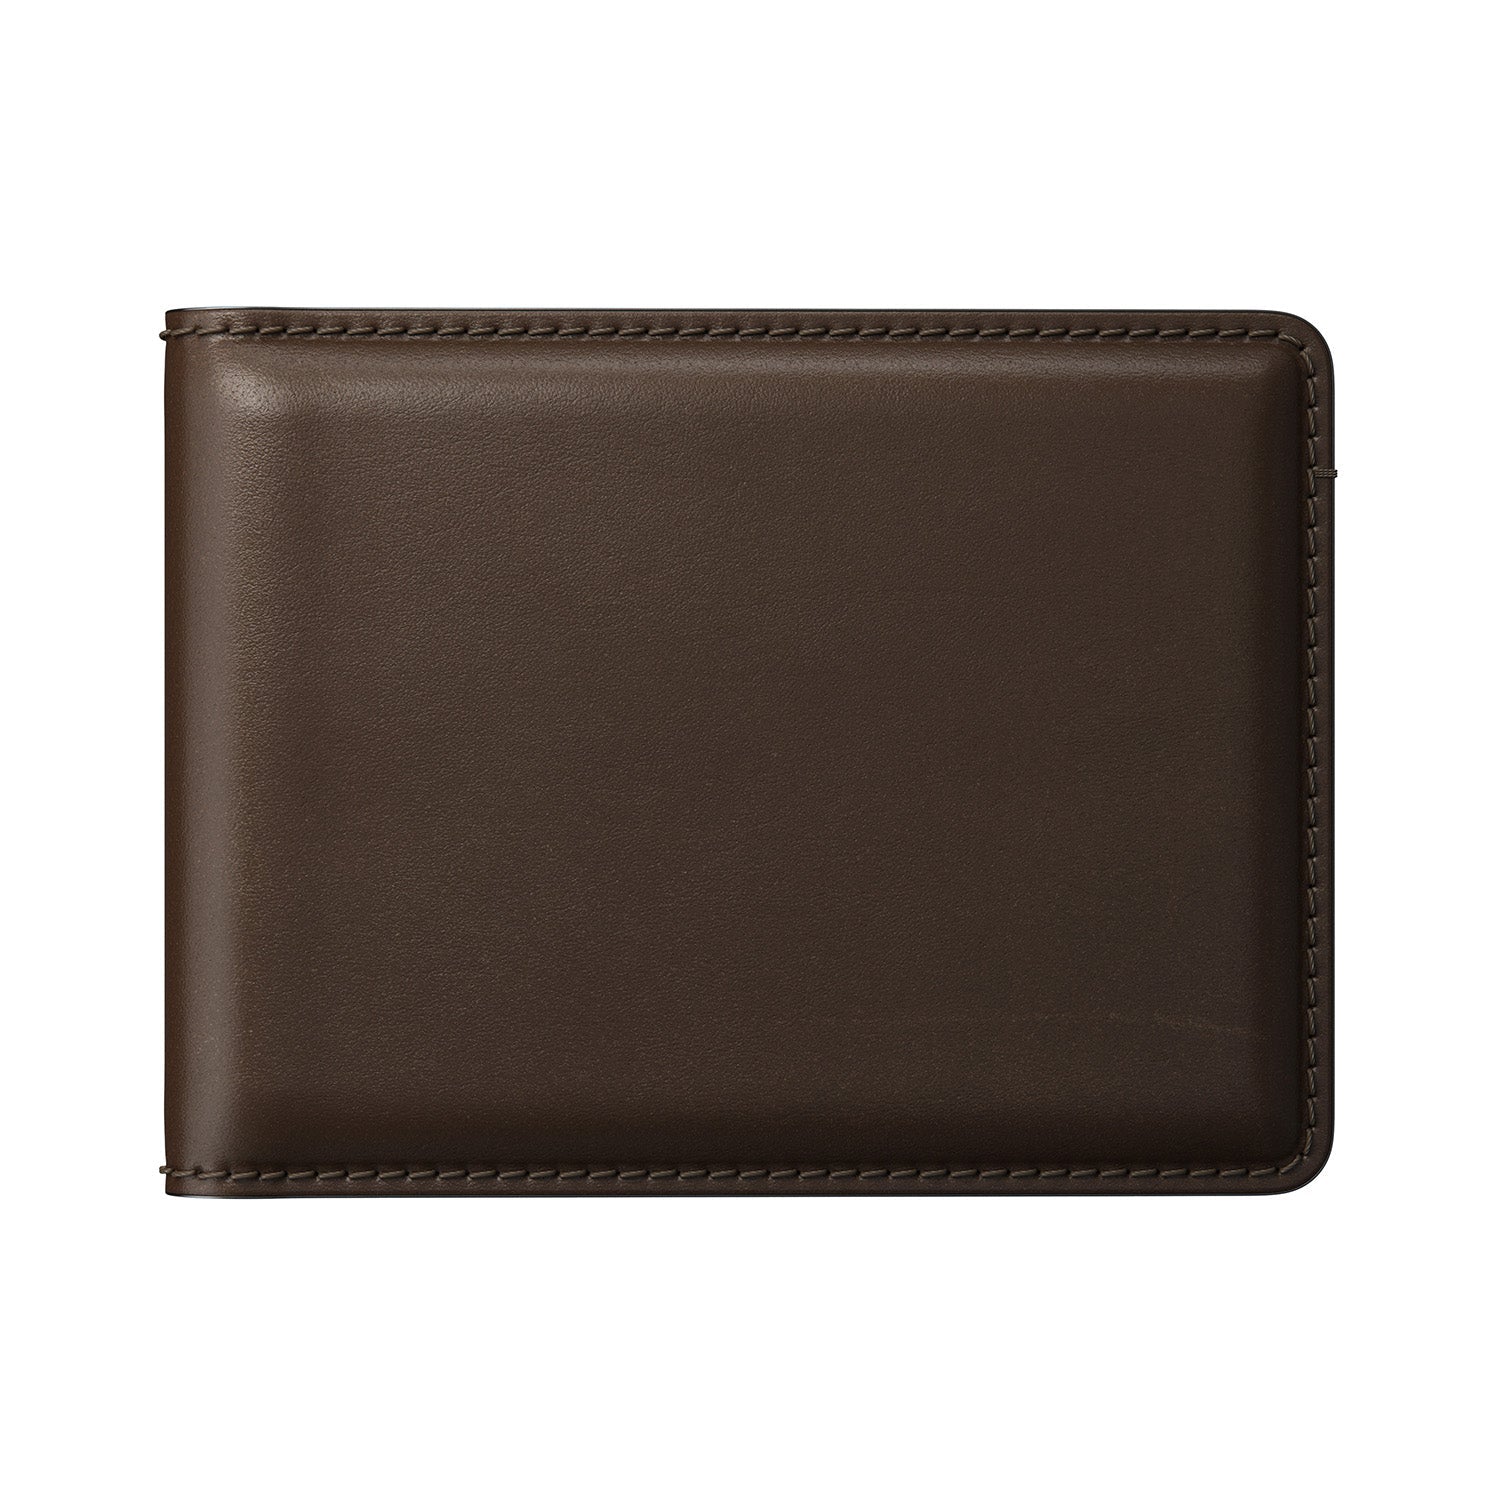 NOMAD Horween Leather Bifold Wallet Wallets & Money Clips NOMAD Rustic Brown 